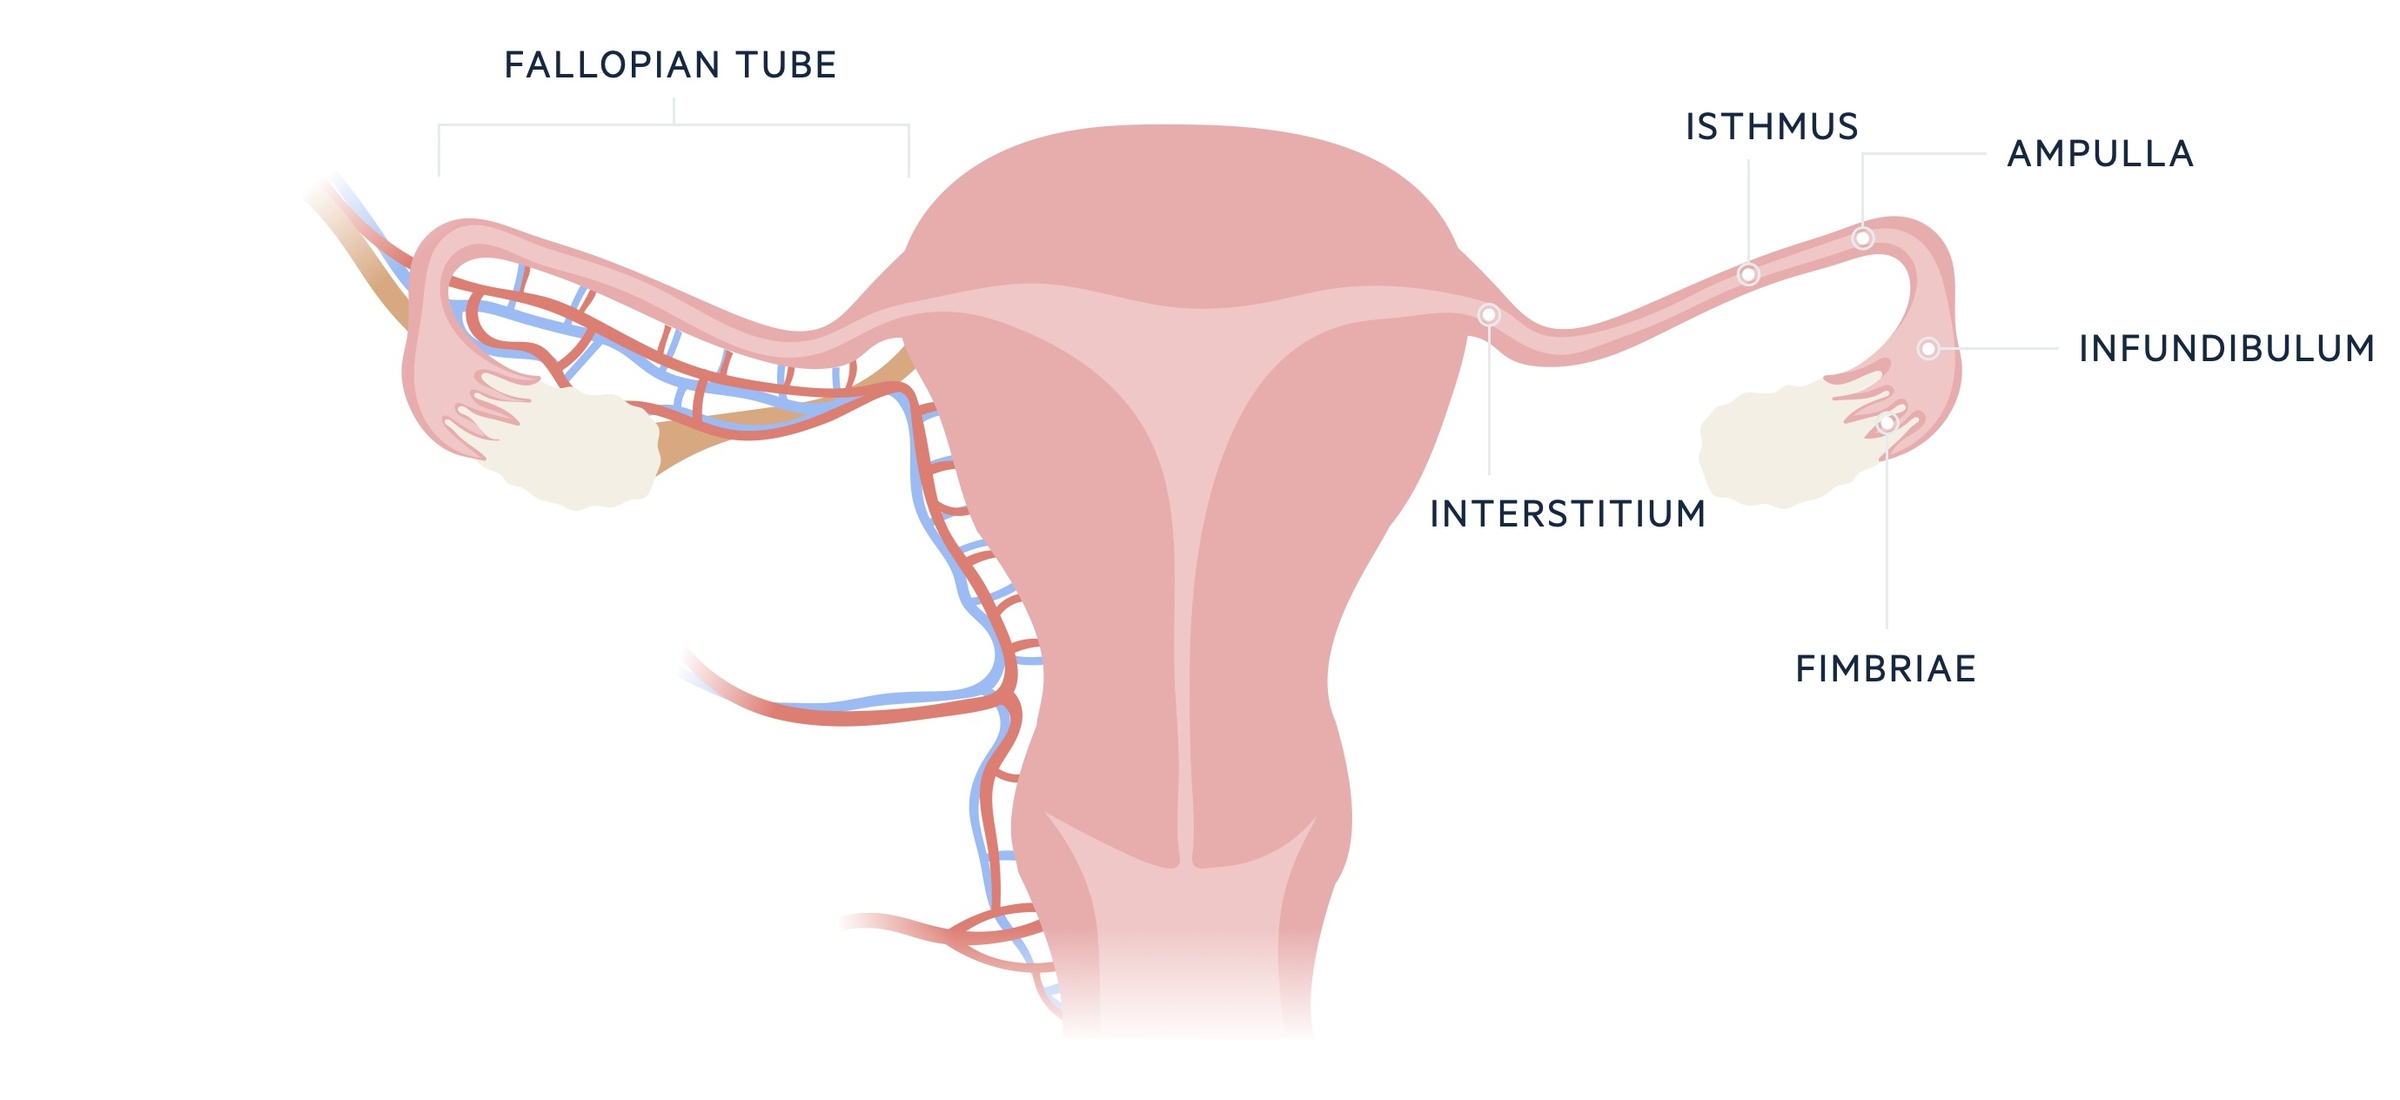 18-enigmatic-facts-about-fimbriae-of-fallopian-tubes